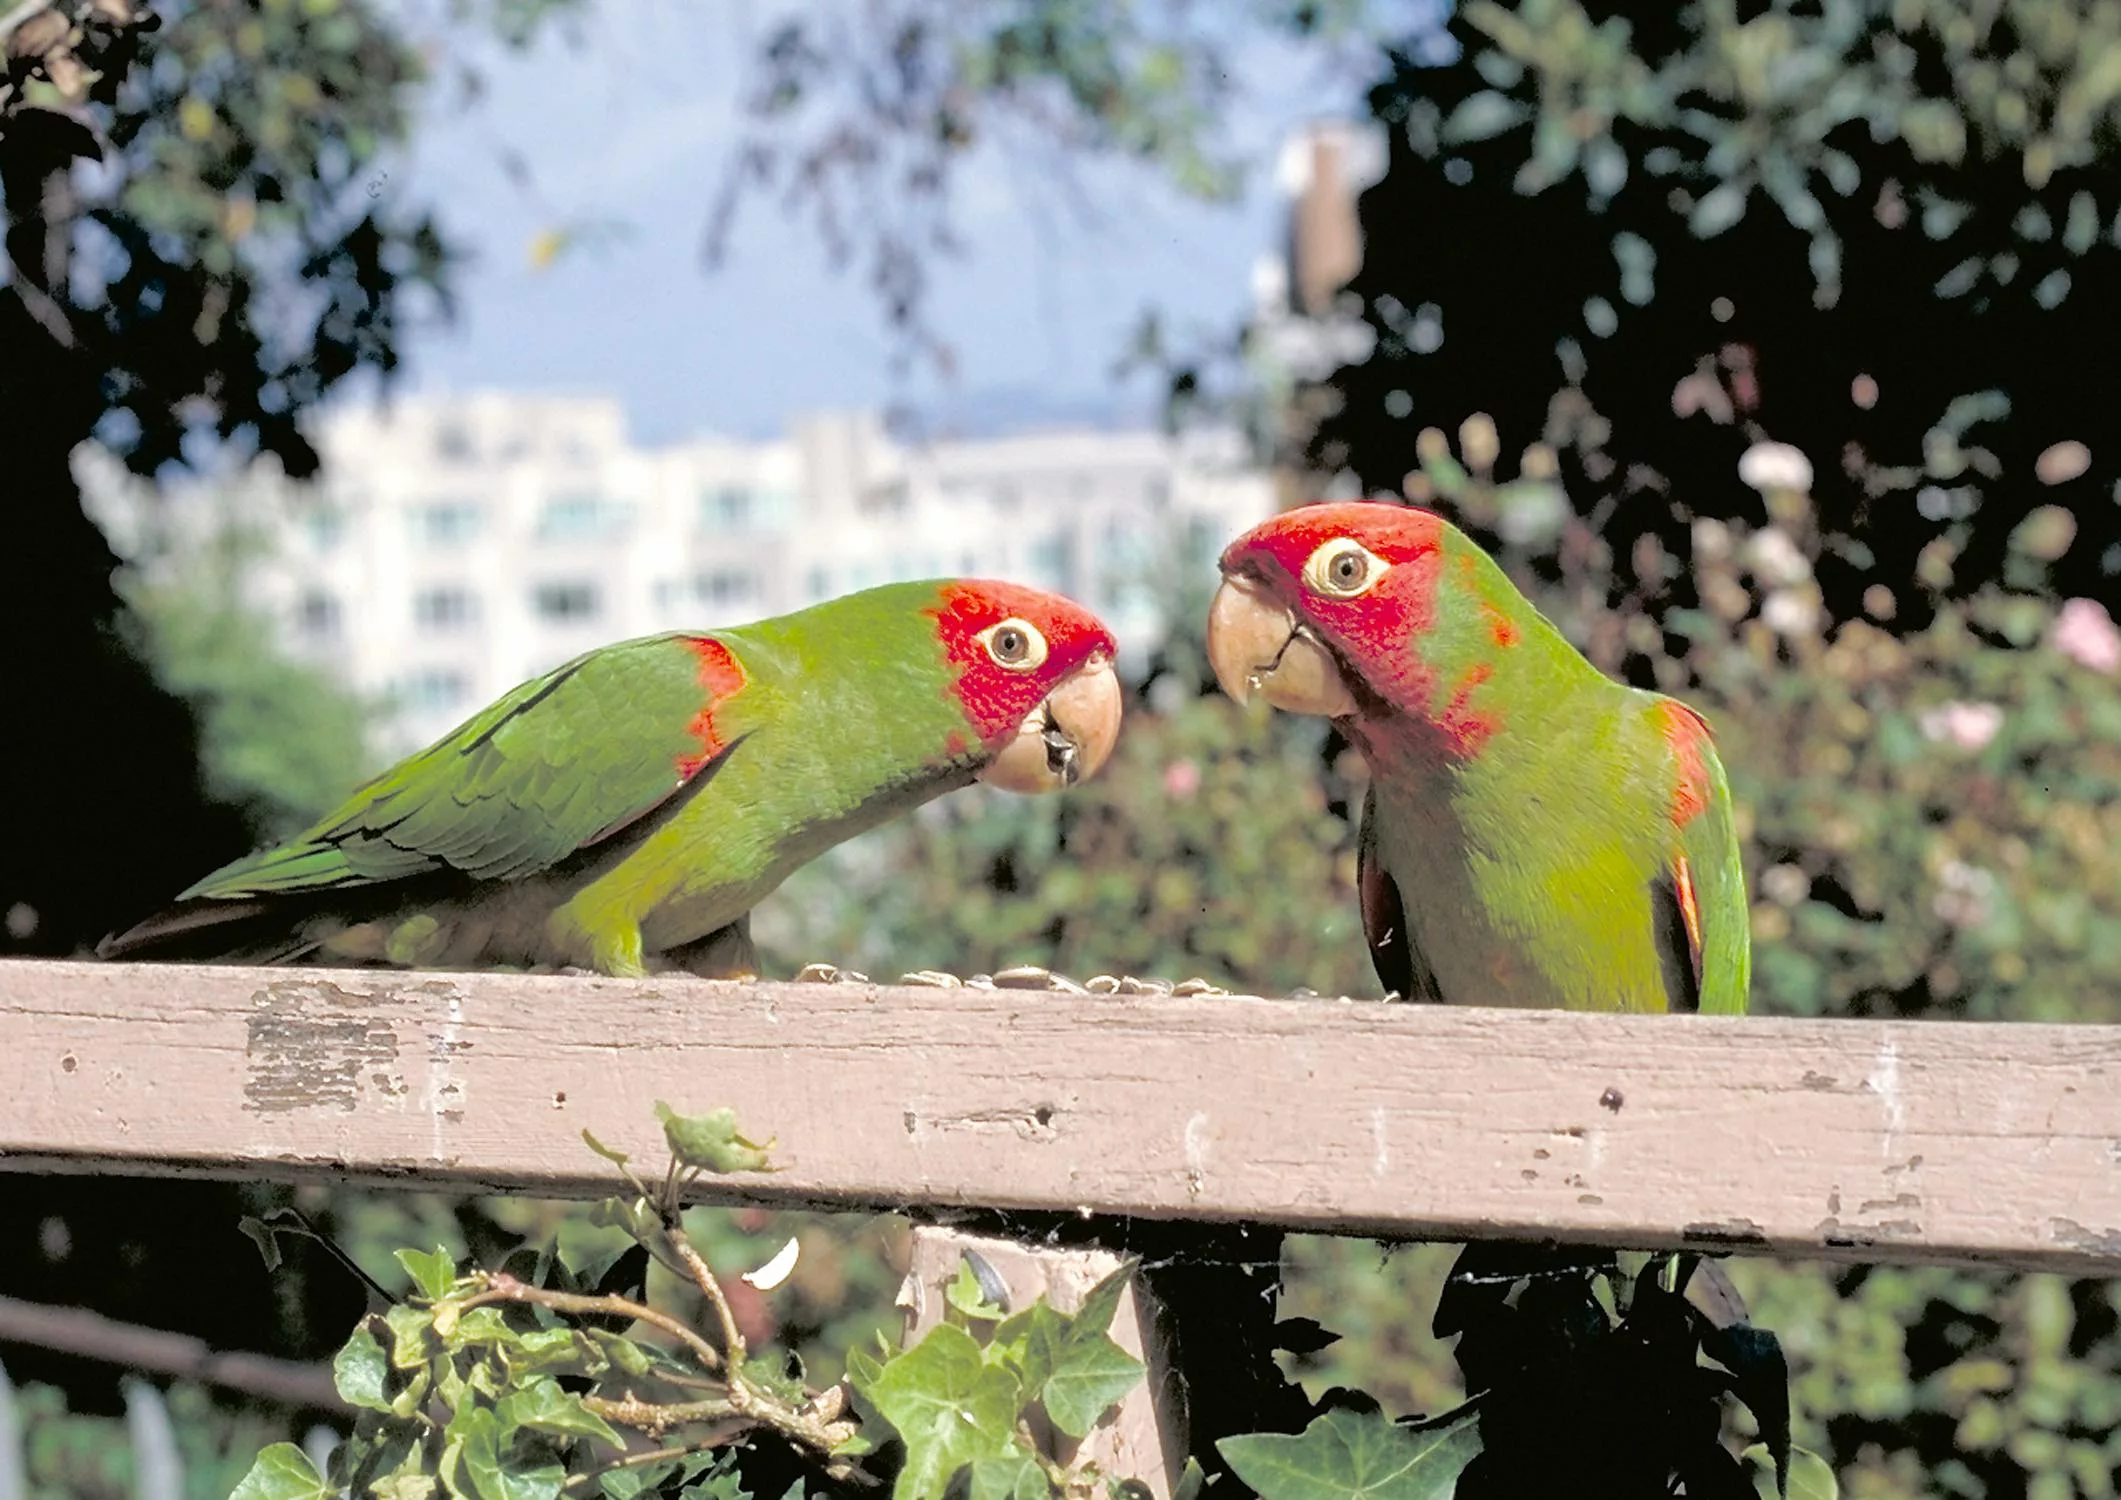 A close up of 2 red & green wild parrots facing one another.